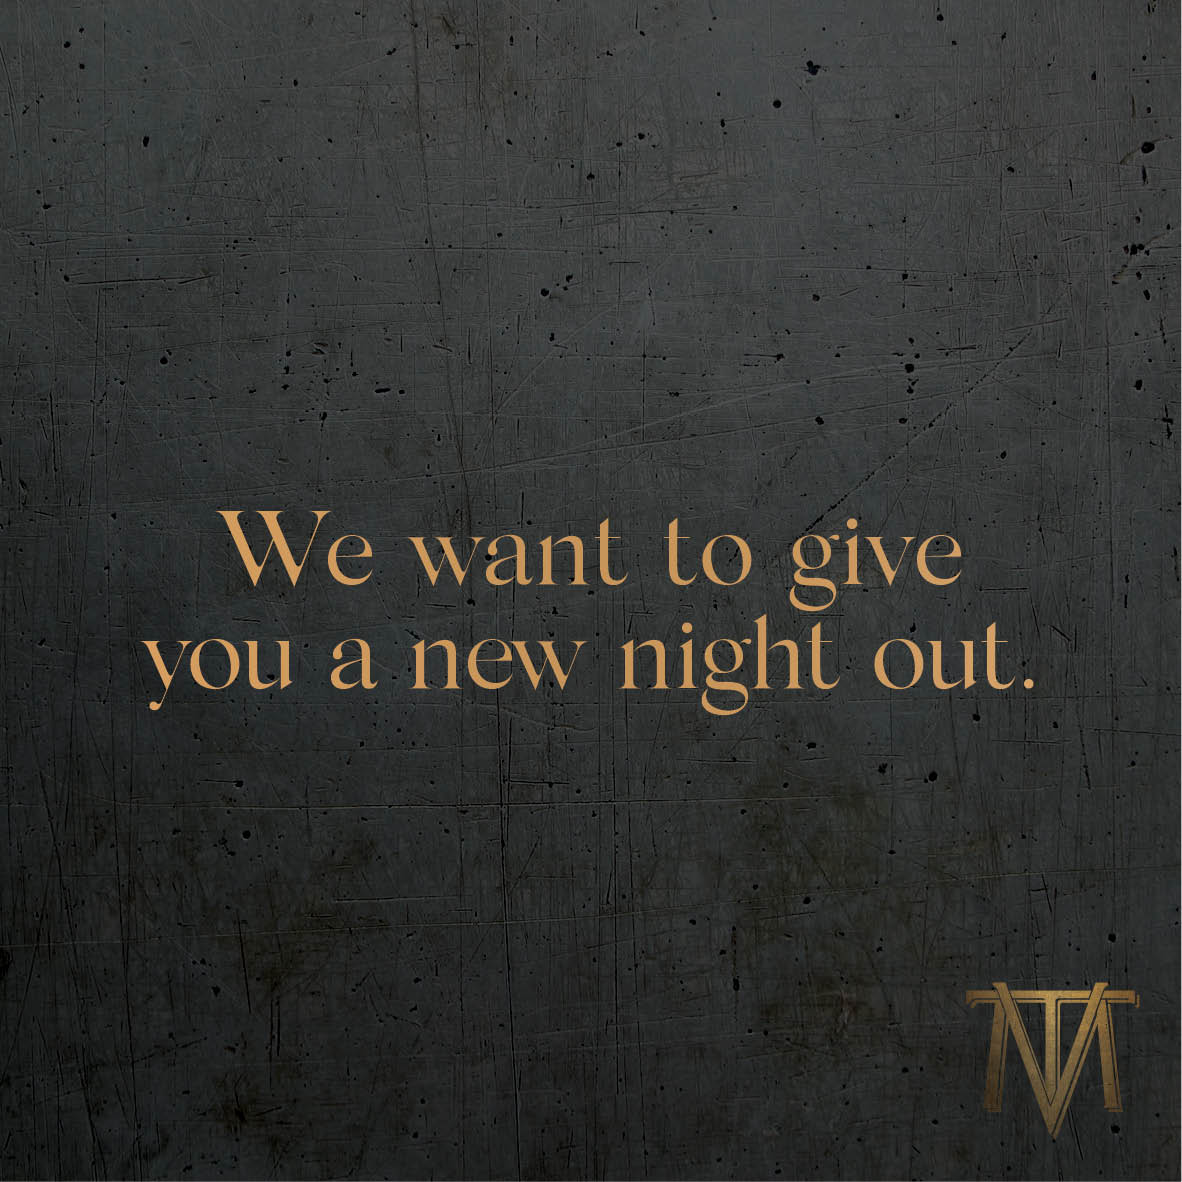 We want to give you a new night out.